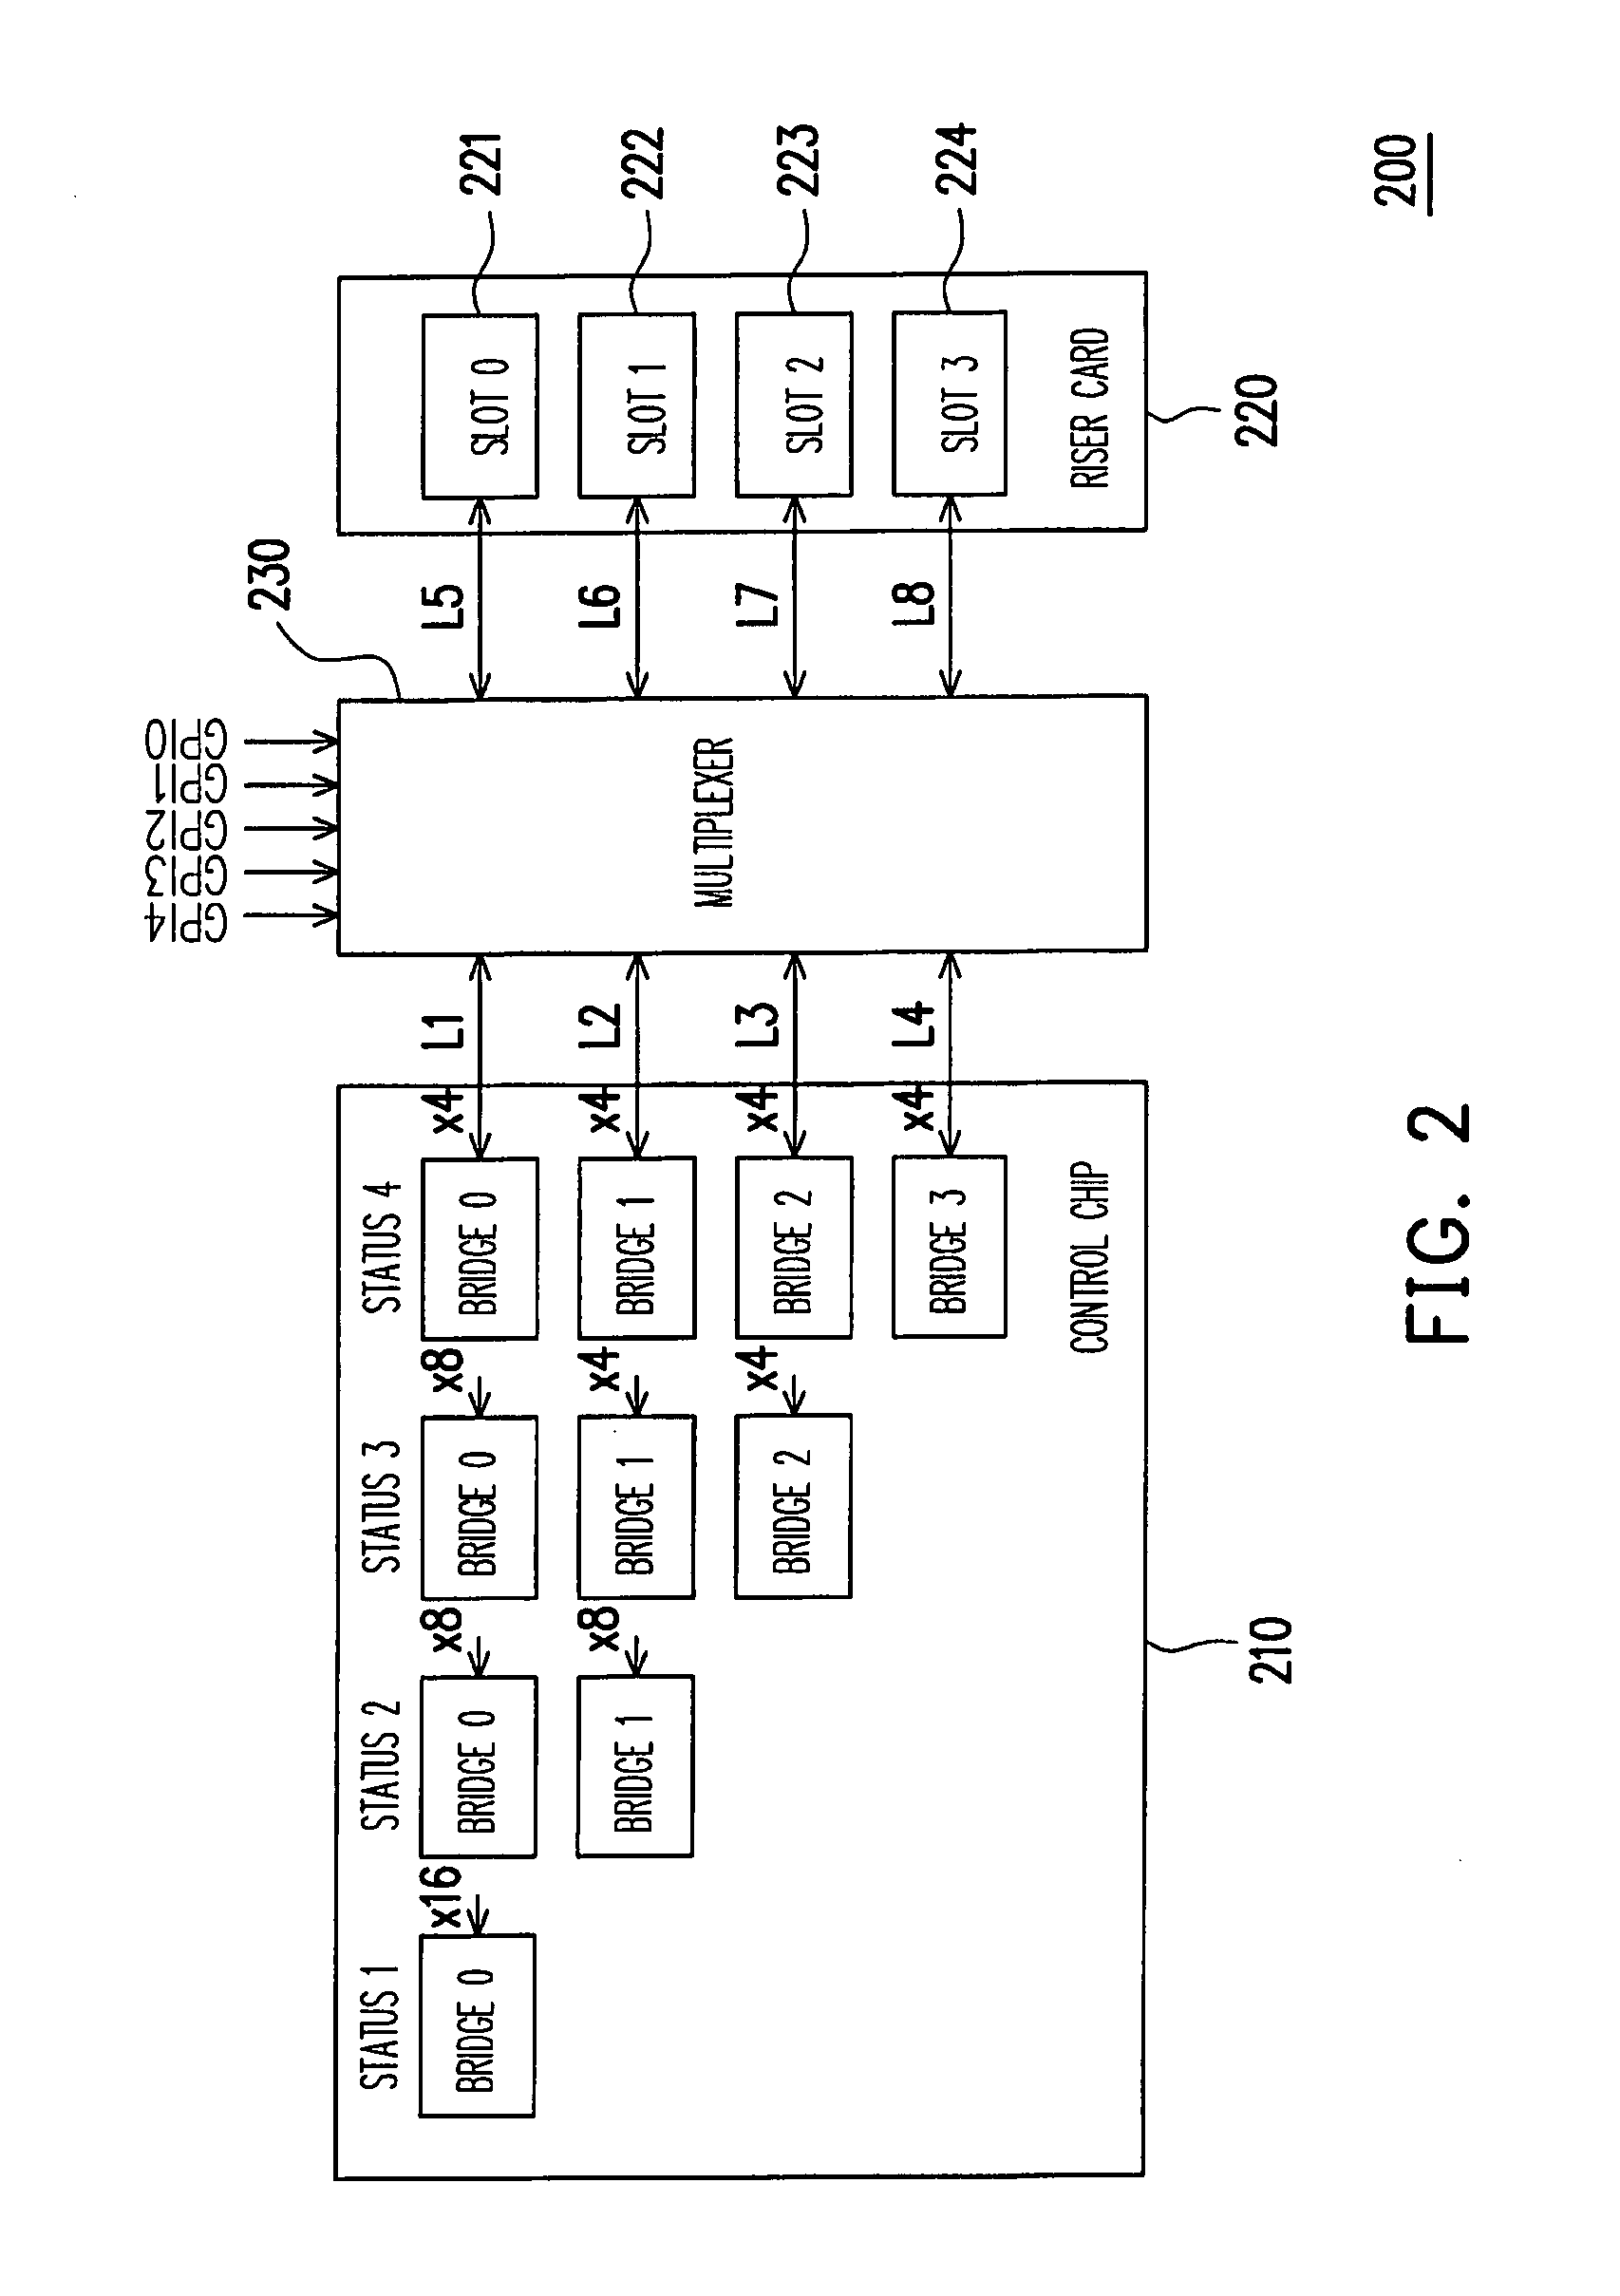 Method for dynamically allocating link width of riser card